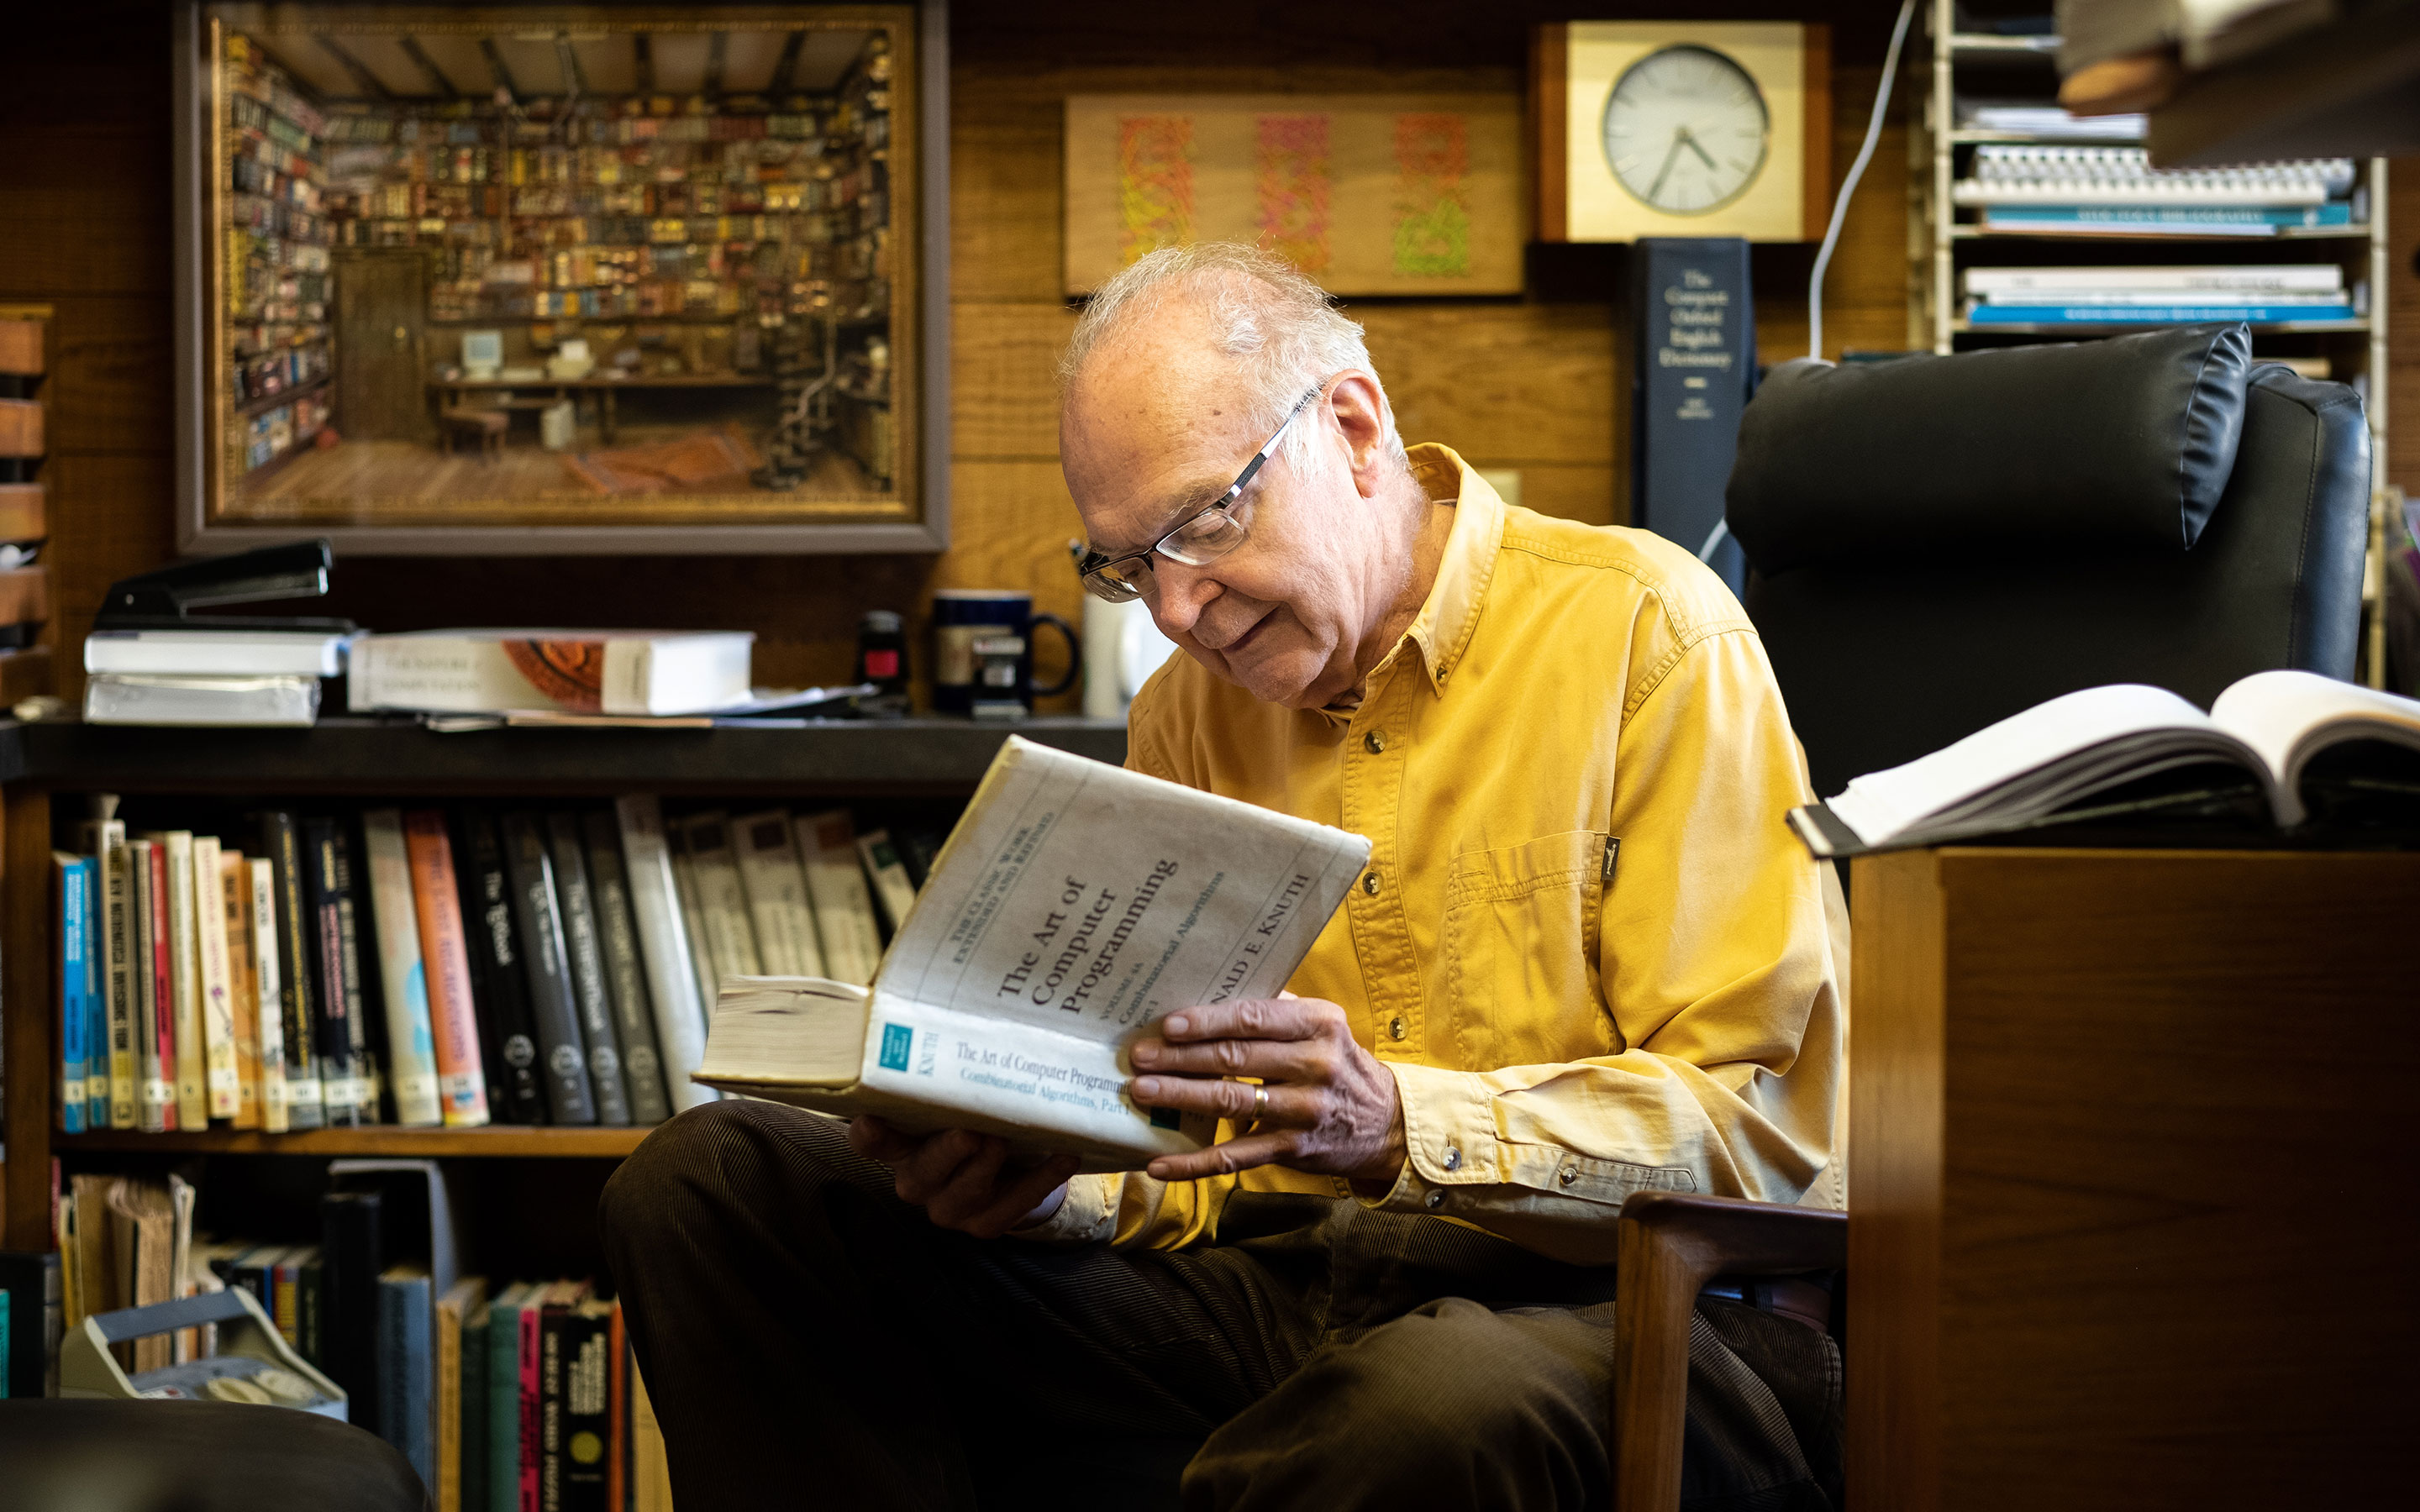 Professor of the Art of Computer Programming: Who is Donald Knuth?